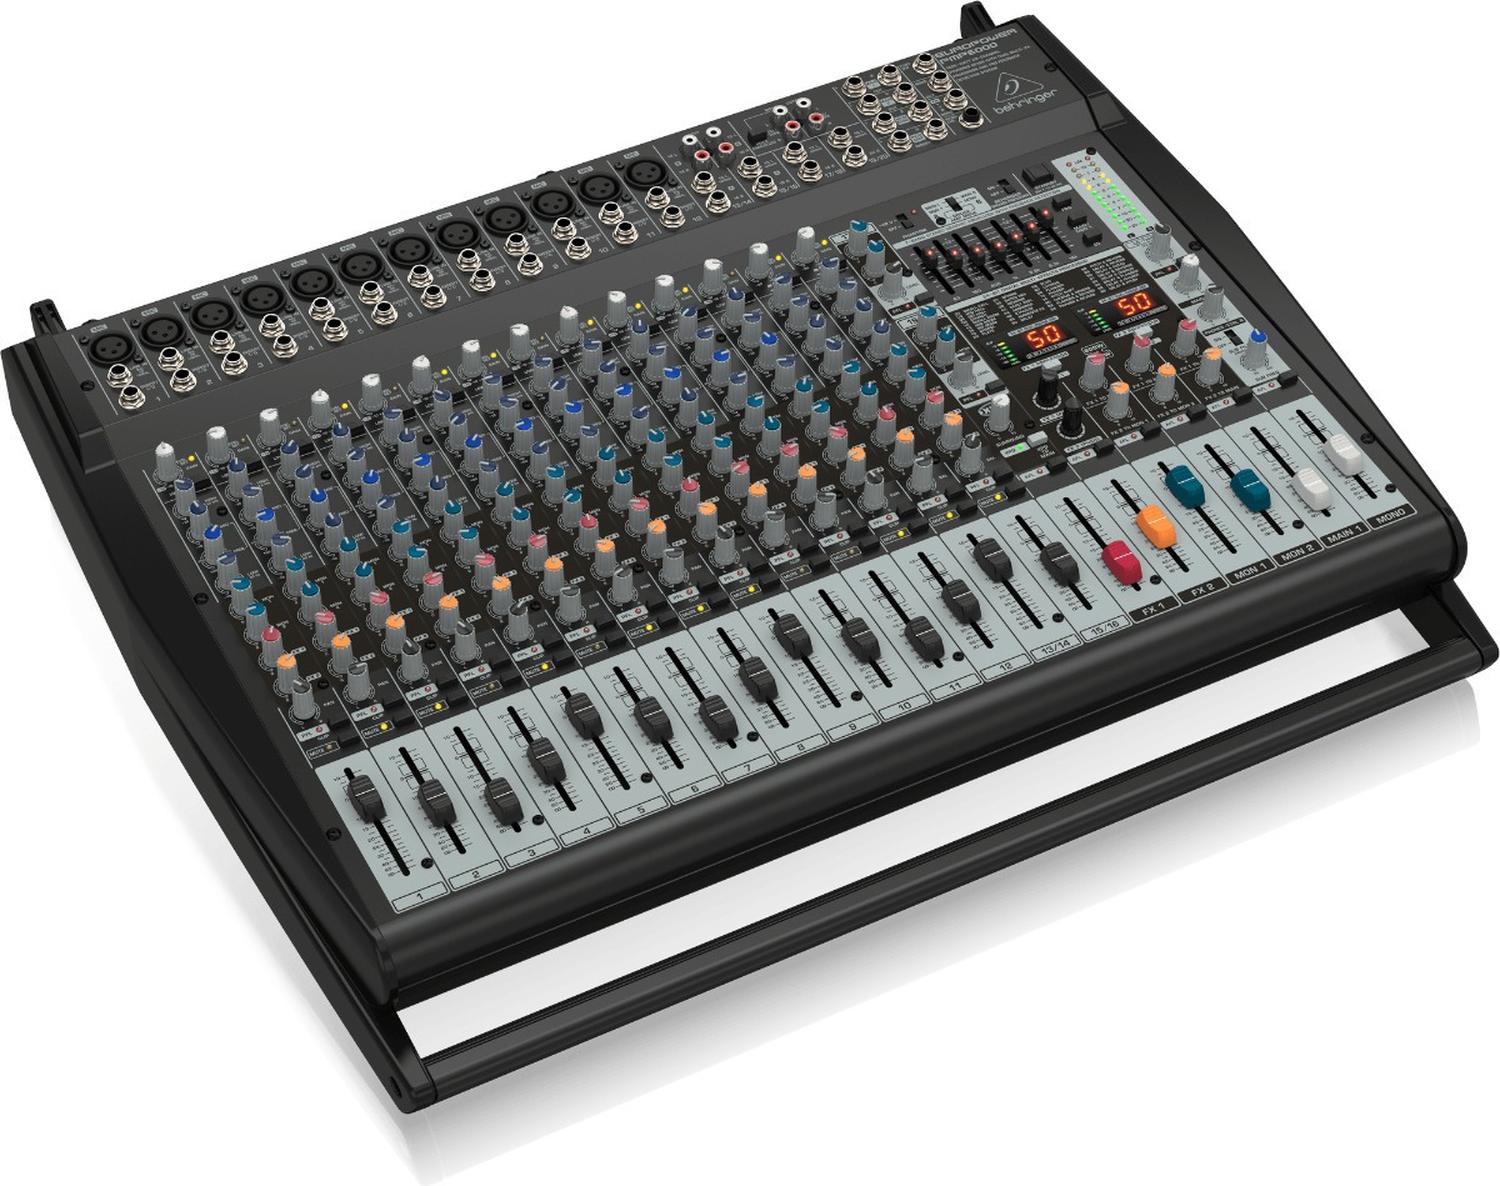 Consola Amplificada 1600w 20 Canales Fx Behringer Pmp6000